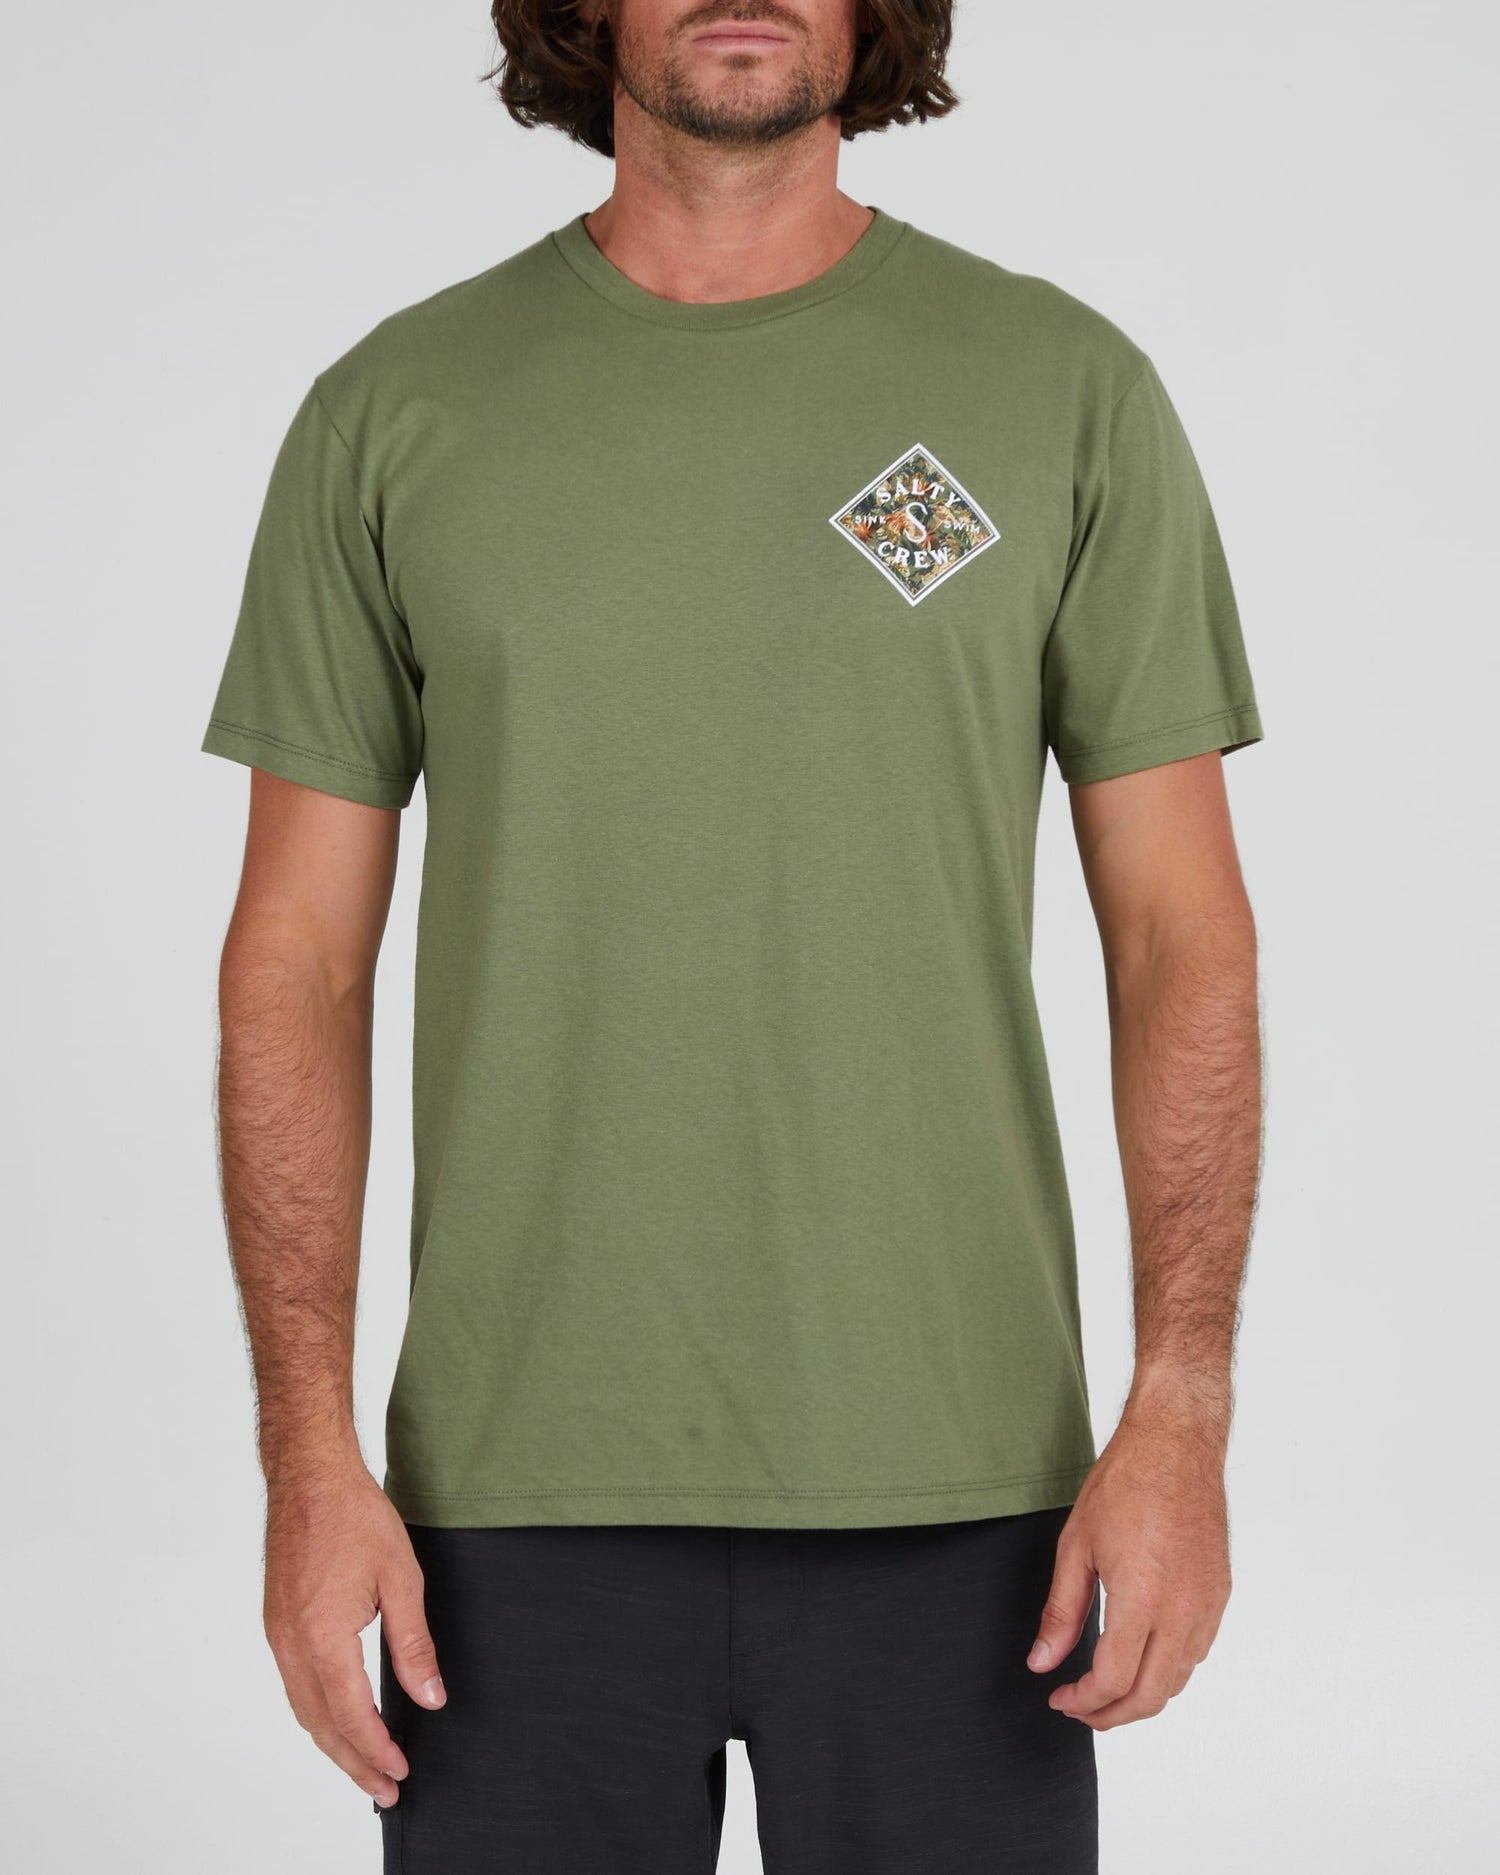 Salty crew T-SHIRTS S/S TIPPET SHORES PREMIUM S/S TEE - Sage green in Sage green